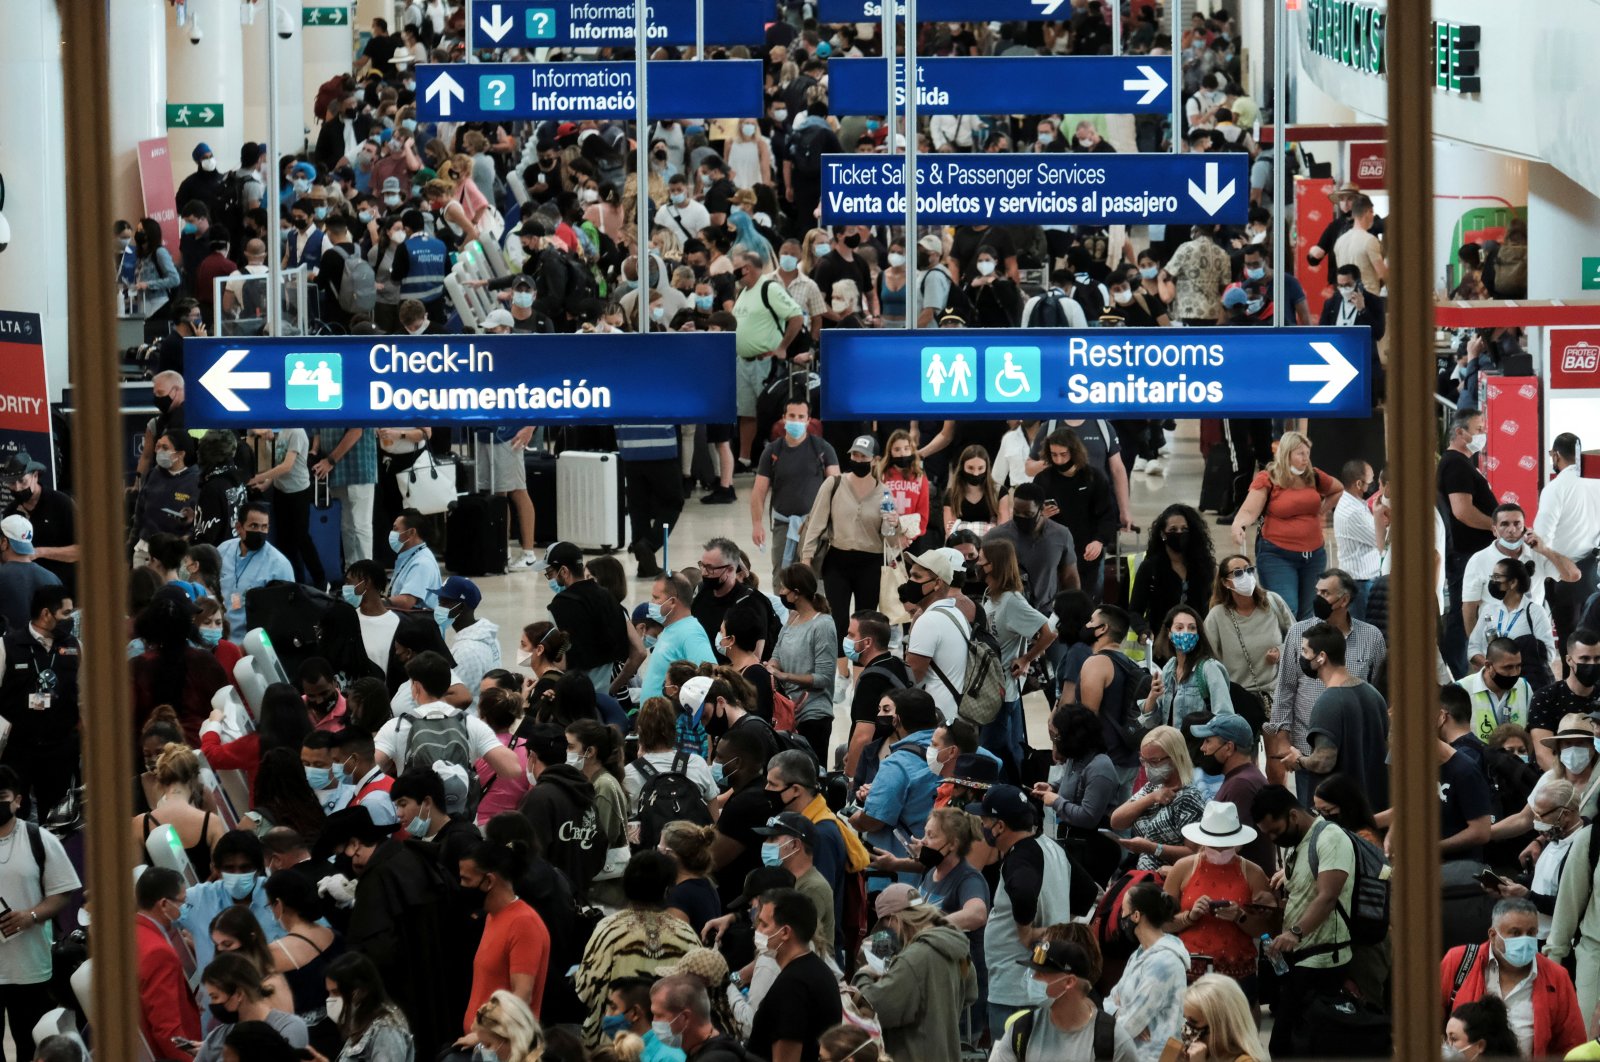 General view of the passenger check-in area as the COVID-19 pandemic continues at the international airport in Cancun, Mexico, Jan. 3, 2022. (Reuters File Photo)